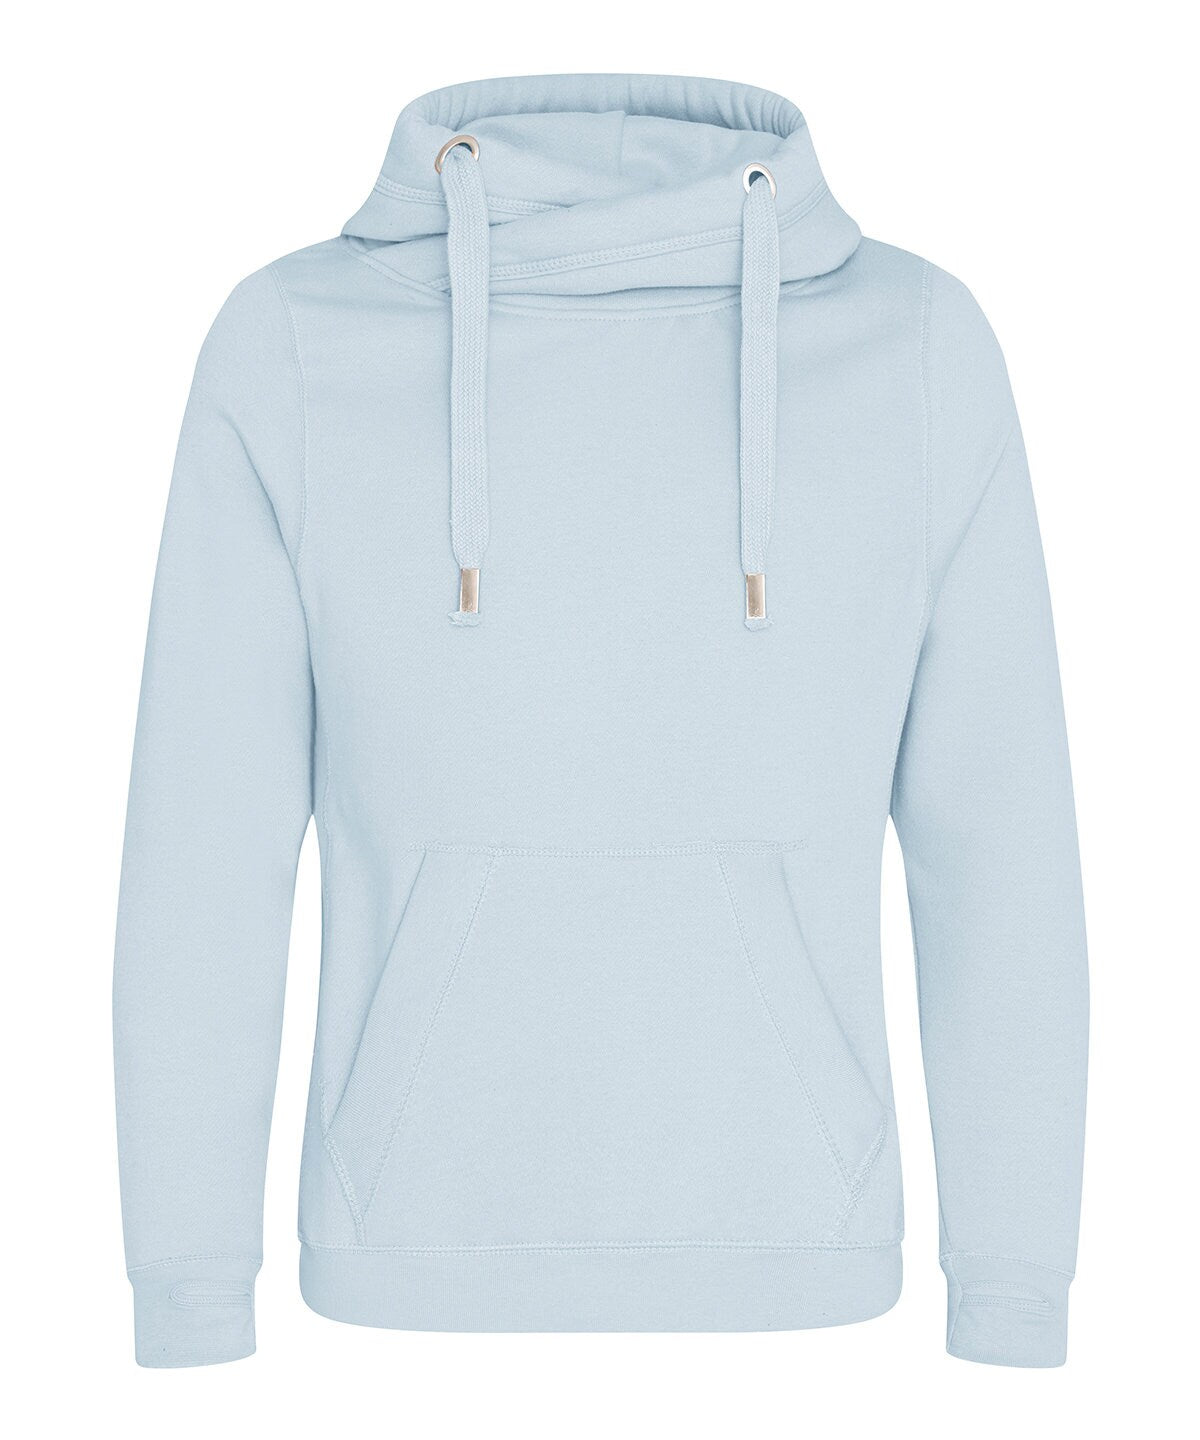 Personalised Cross Neck Hoodie JH021 - Your text or design | Customised Cowl Neck Hoodie